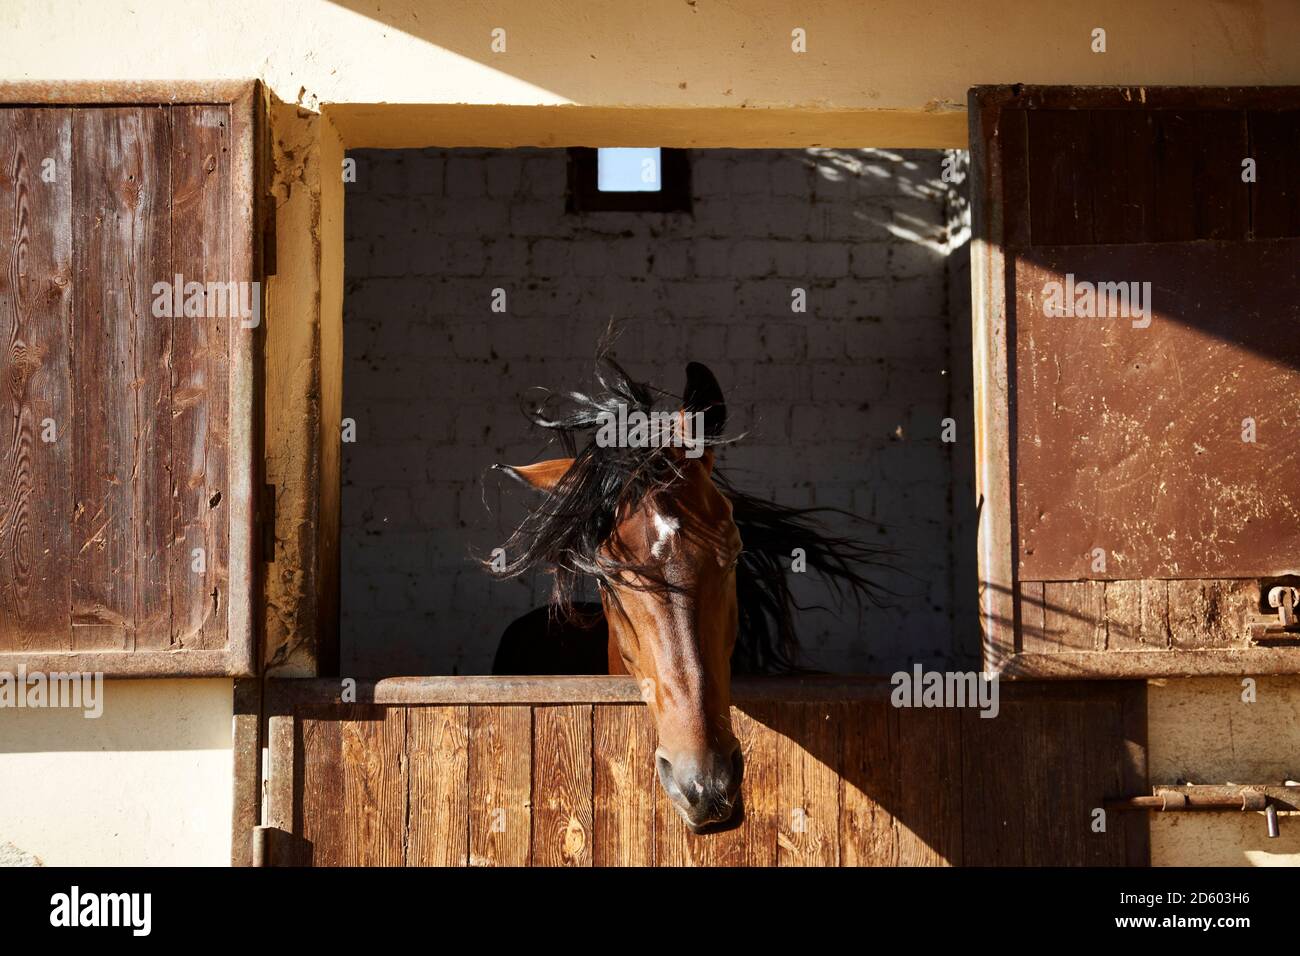 Egypt, El Gouna, horse in stable shaking head Stock Photo